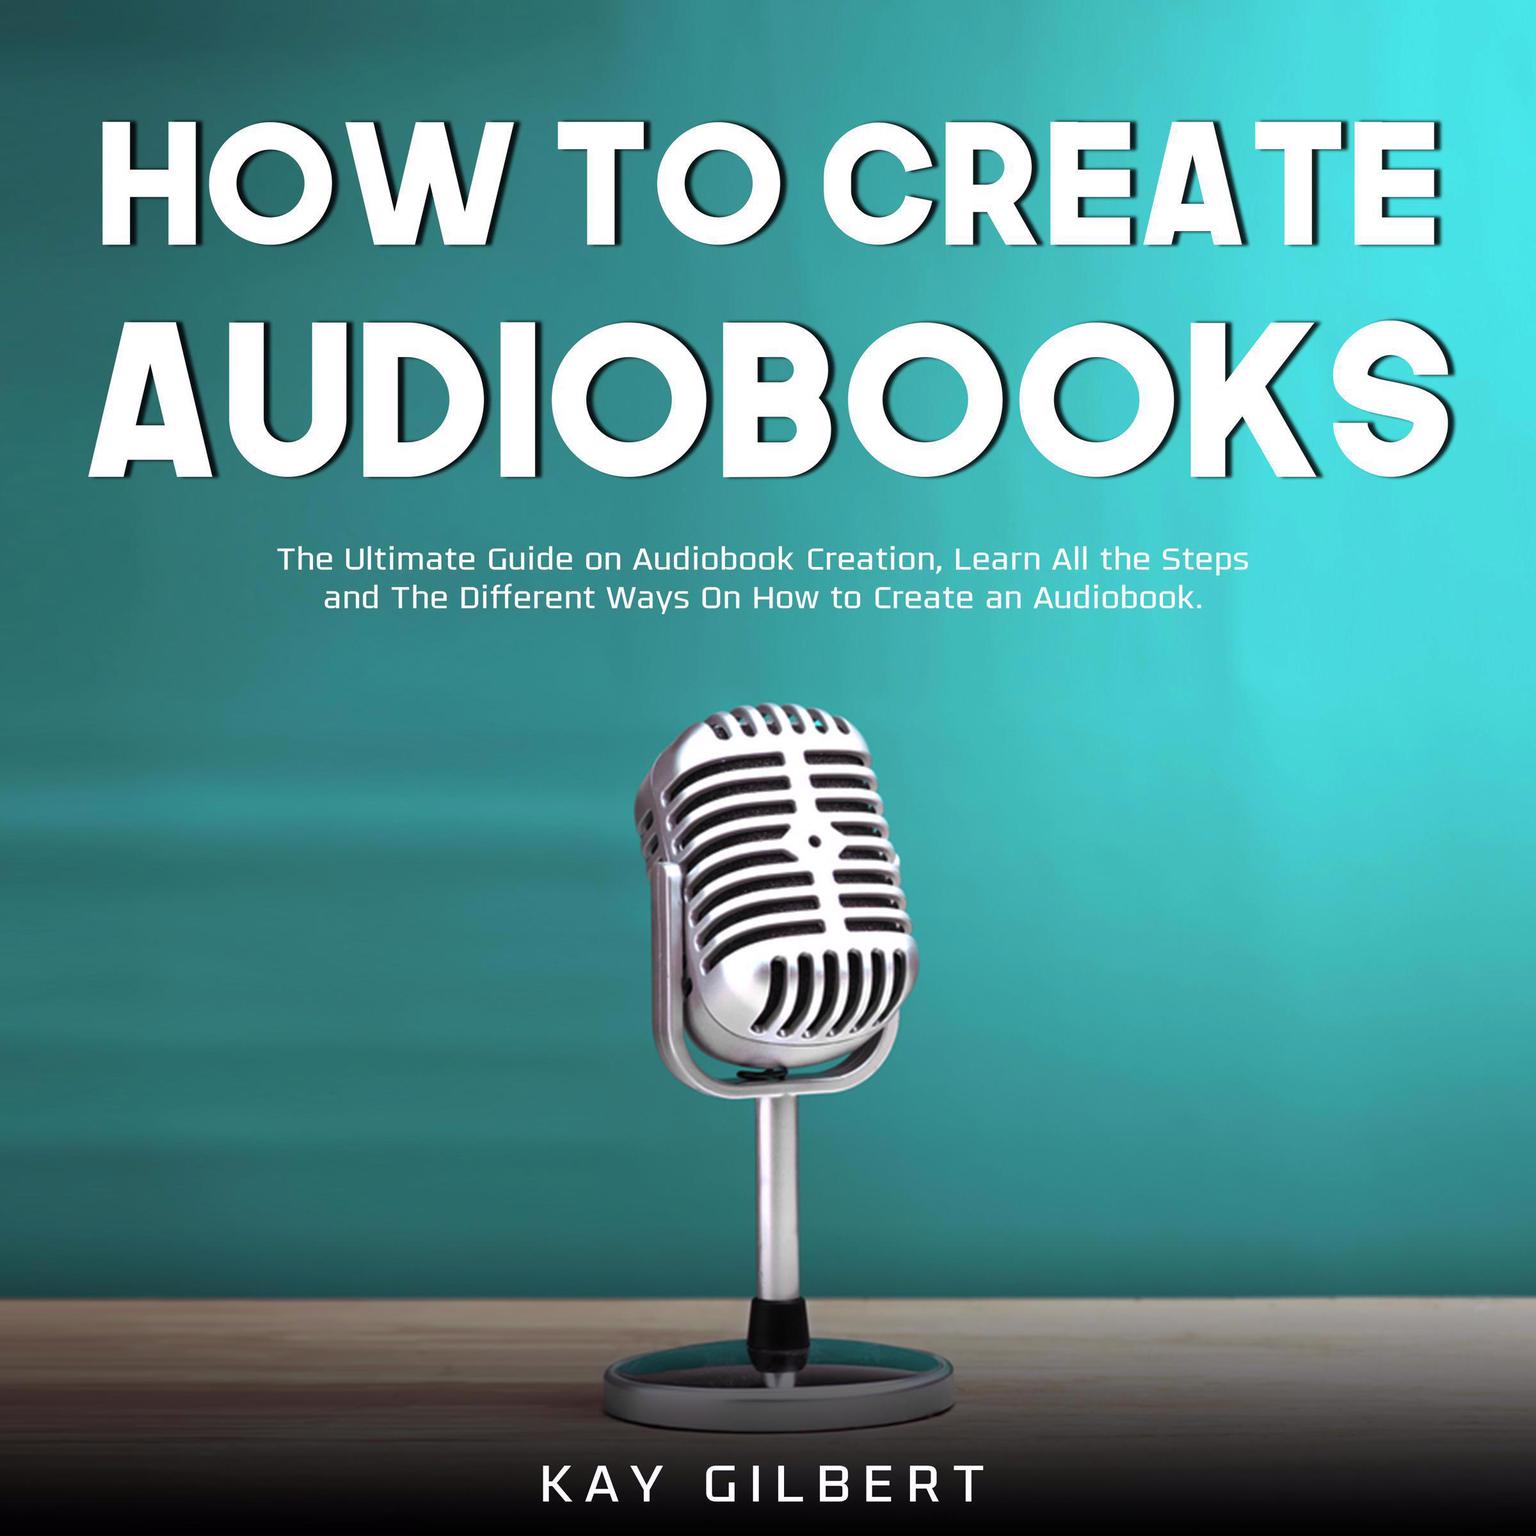 How To Create Audiobooks: The Ultimate Guide on Audiobook Creation, Learn All the Steps and The Different Ways On How to Create an Audiobook Audiobook, by Kay Gilbert